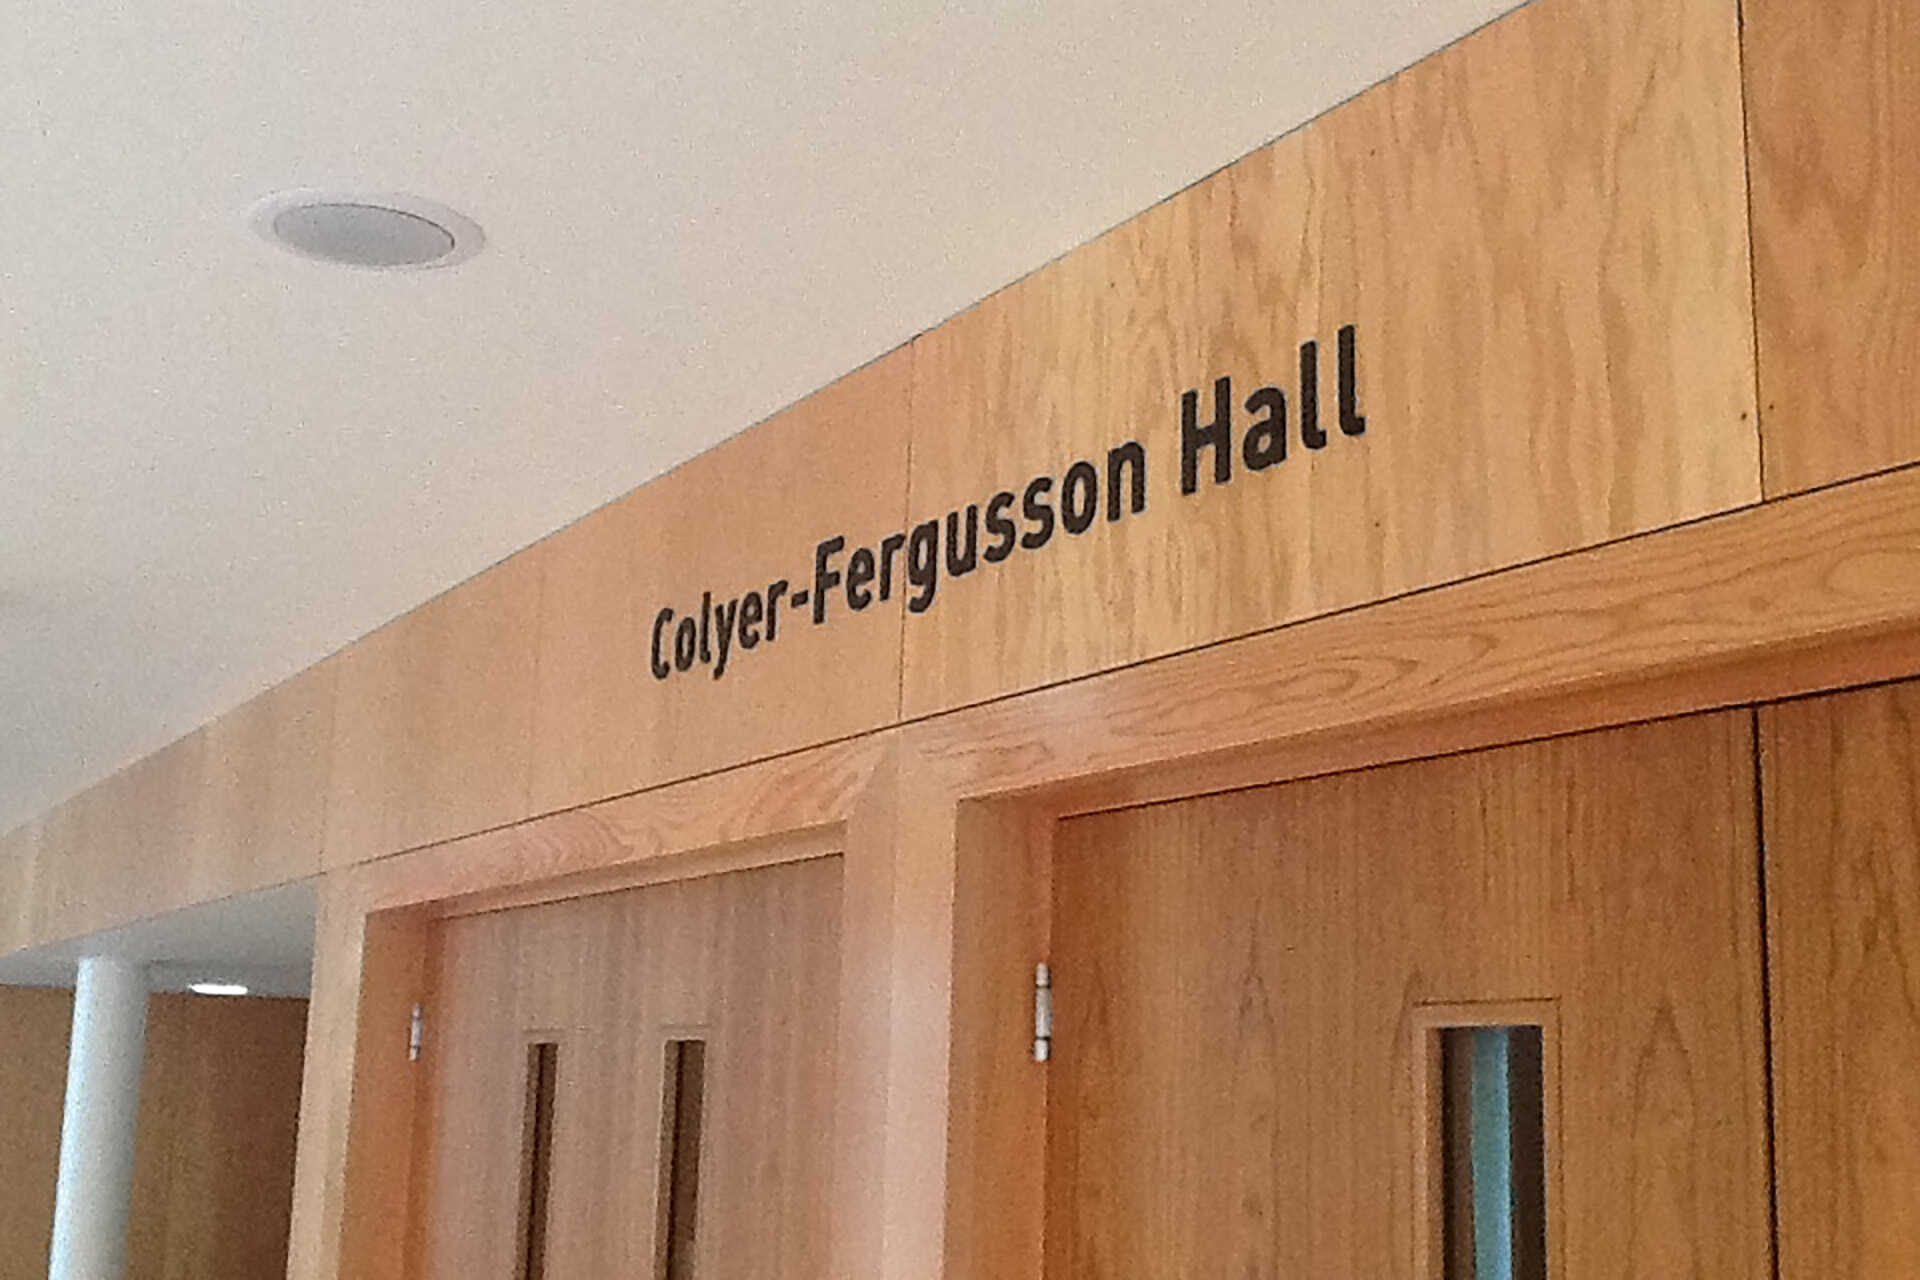 Entrance doors to Colyer-Fergusson Hall